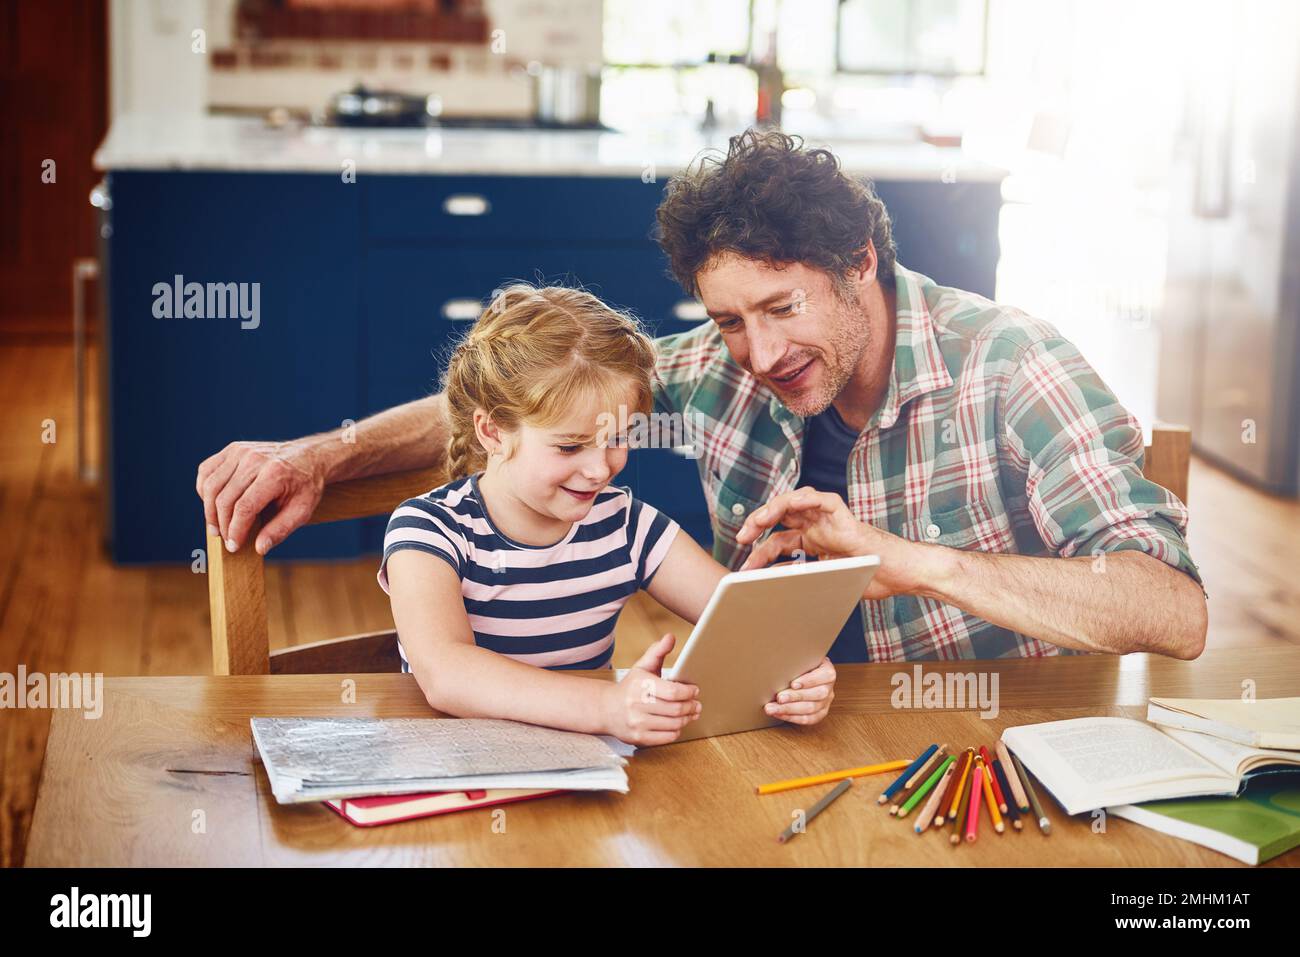 And then you press over here...a father helping his daughter complete her homework on a digital tablet. Stock Photo